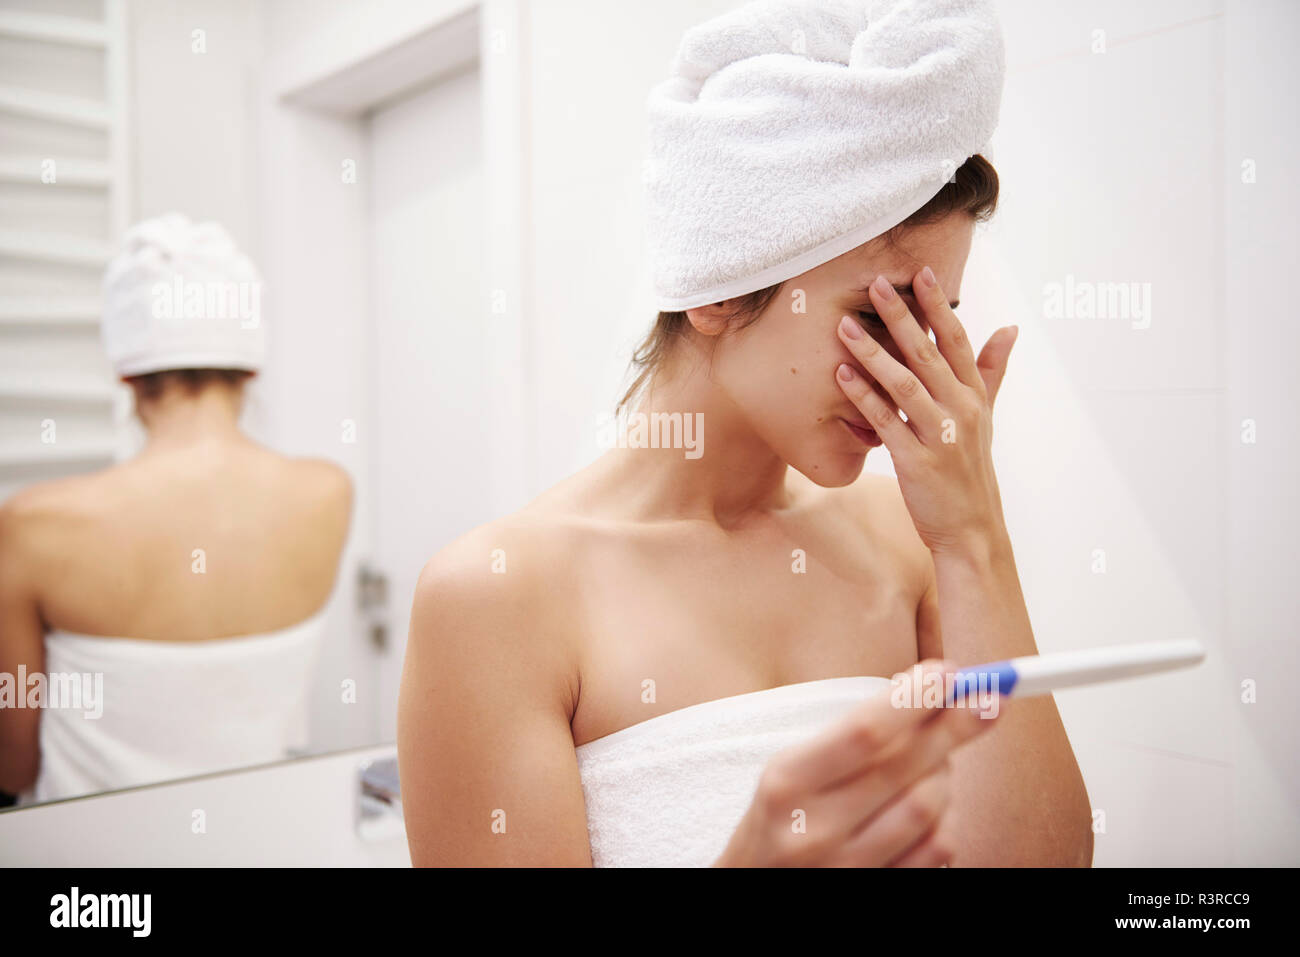 Young woman in bathroom worrying over pregnancy test result Stock Photo